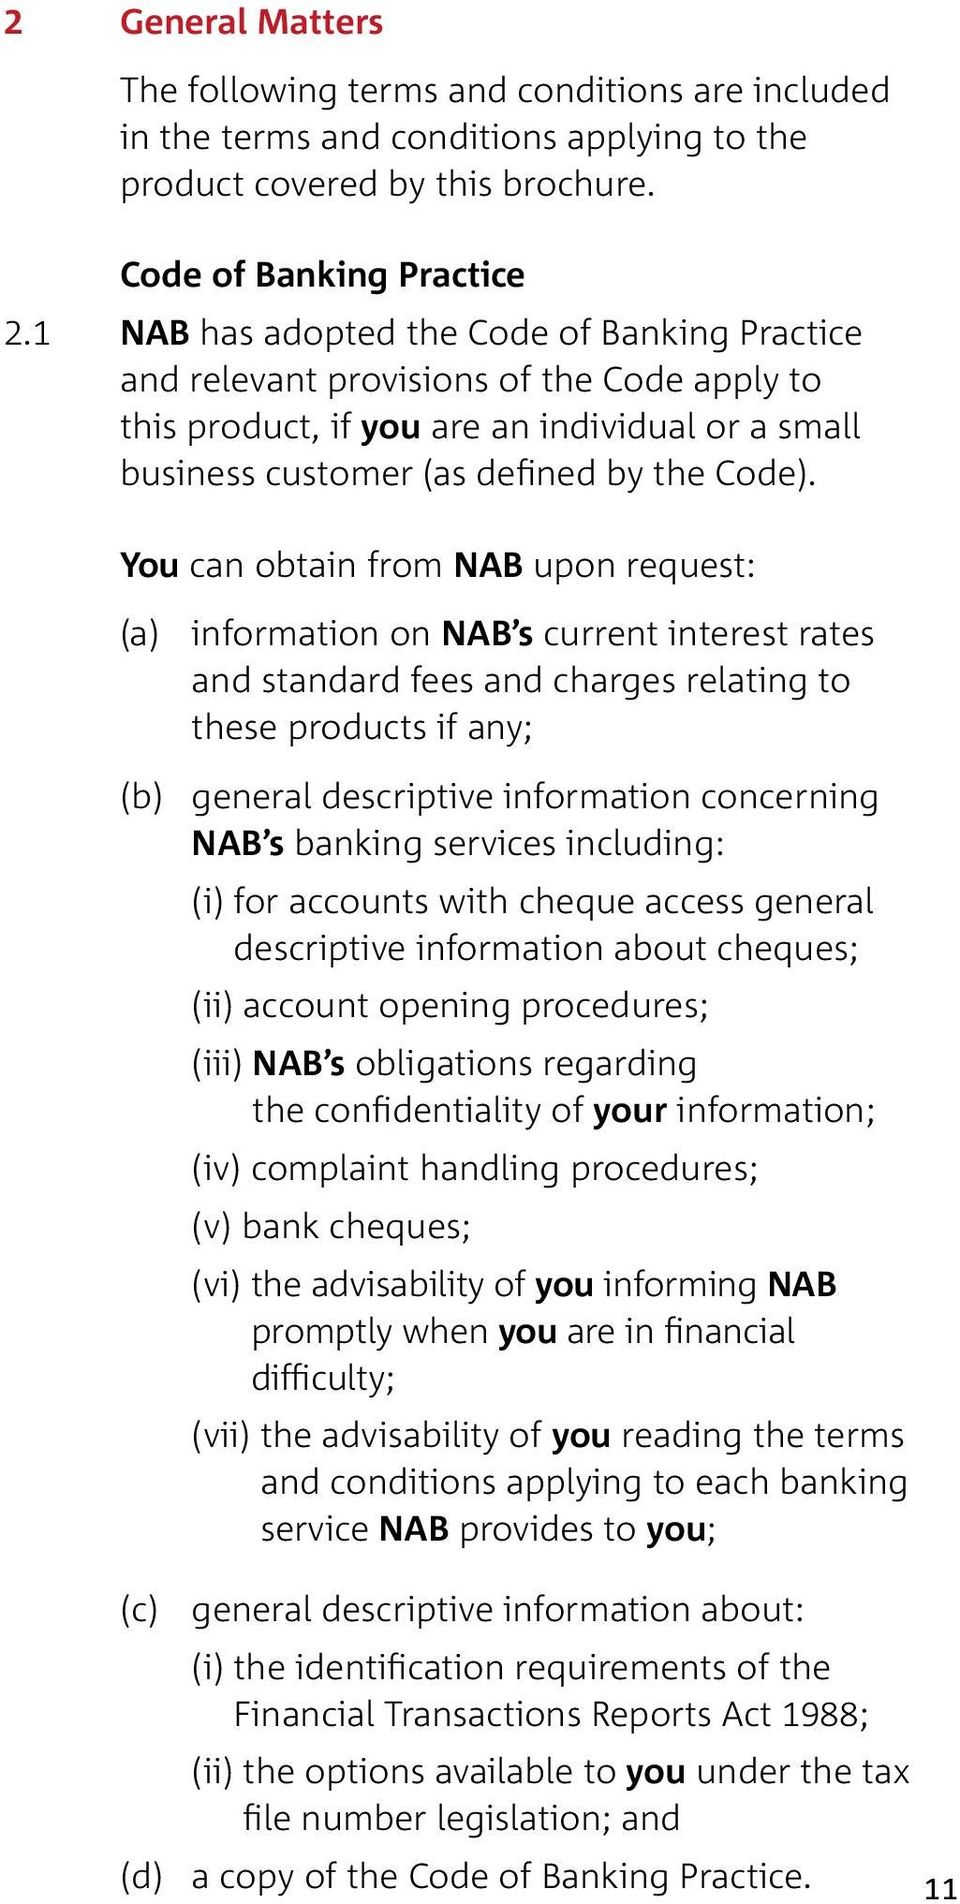 You can obtain from NAB upon request: (a) information on NAB s current interest rates and standard fees and charges relating to these products if any; (b) general descriptive information concerning